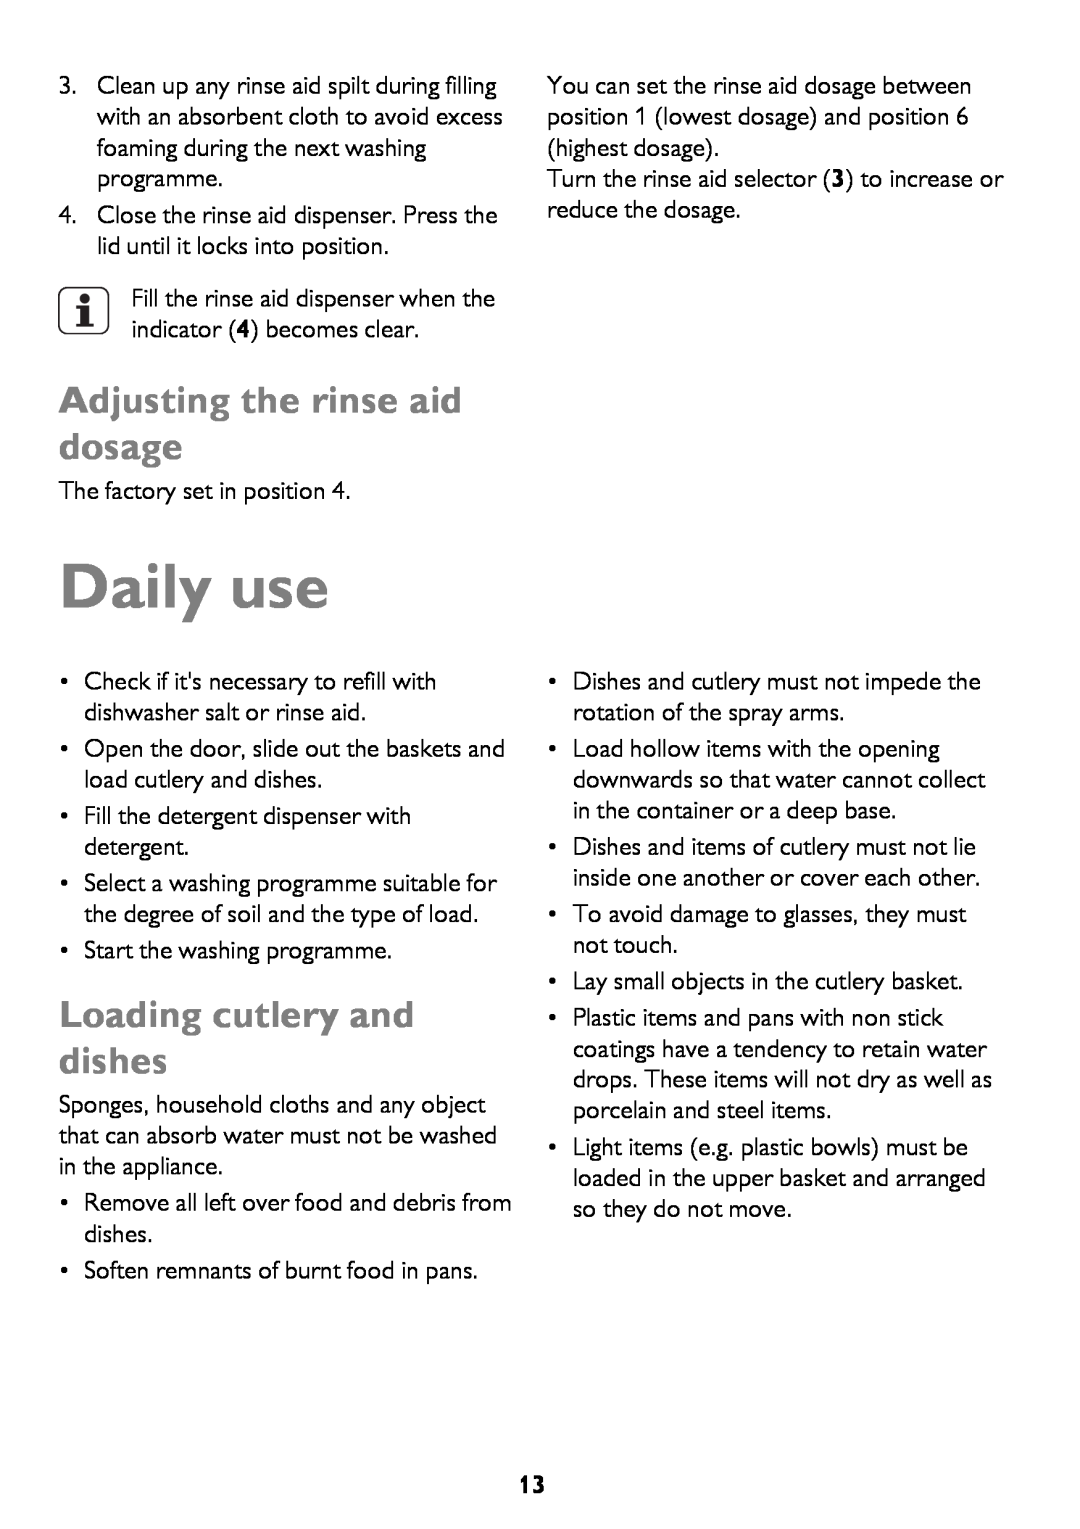 John Lewis JLBIDW 1201 instruction manual Daily use, Adjusting the rinse aid dosage, Loading cutlery and dishes 